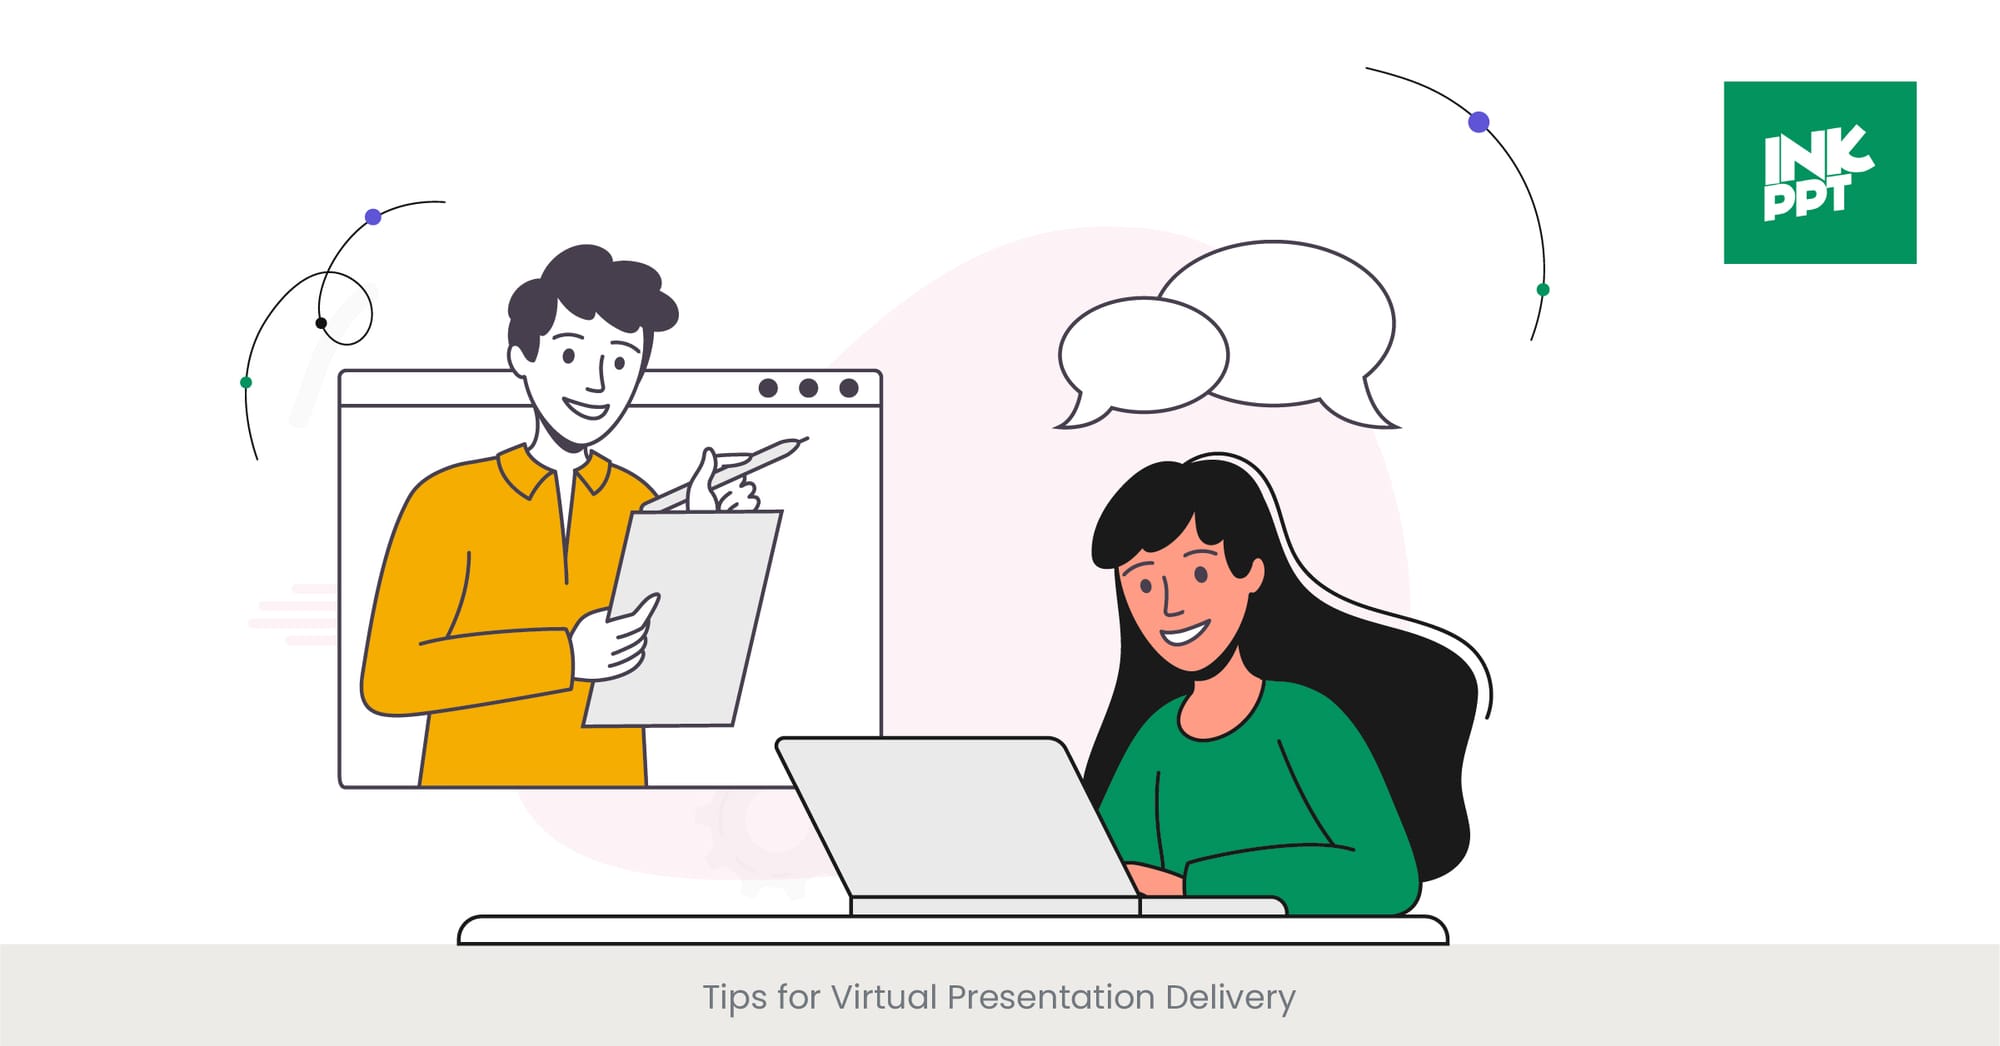 Tips for Virtual Presentation Delivery